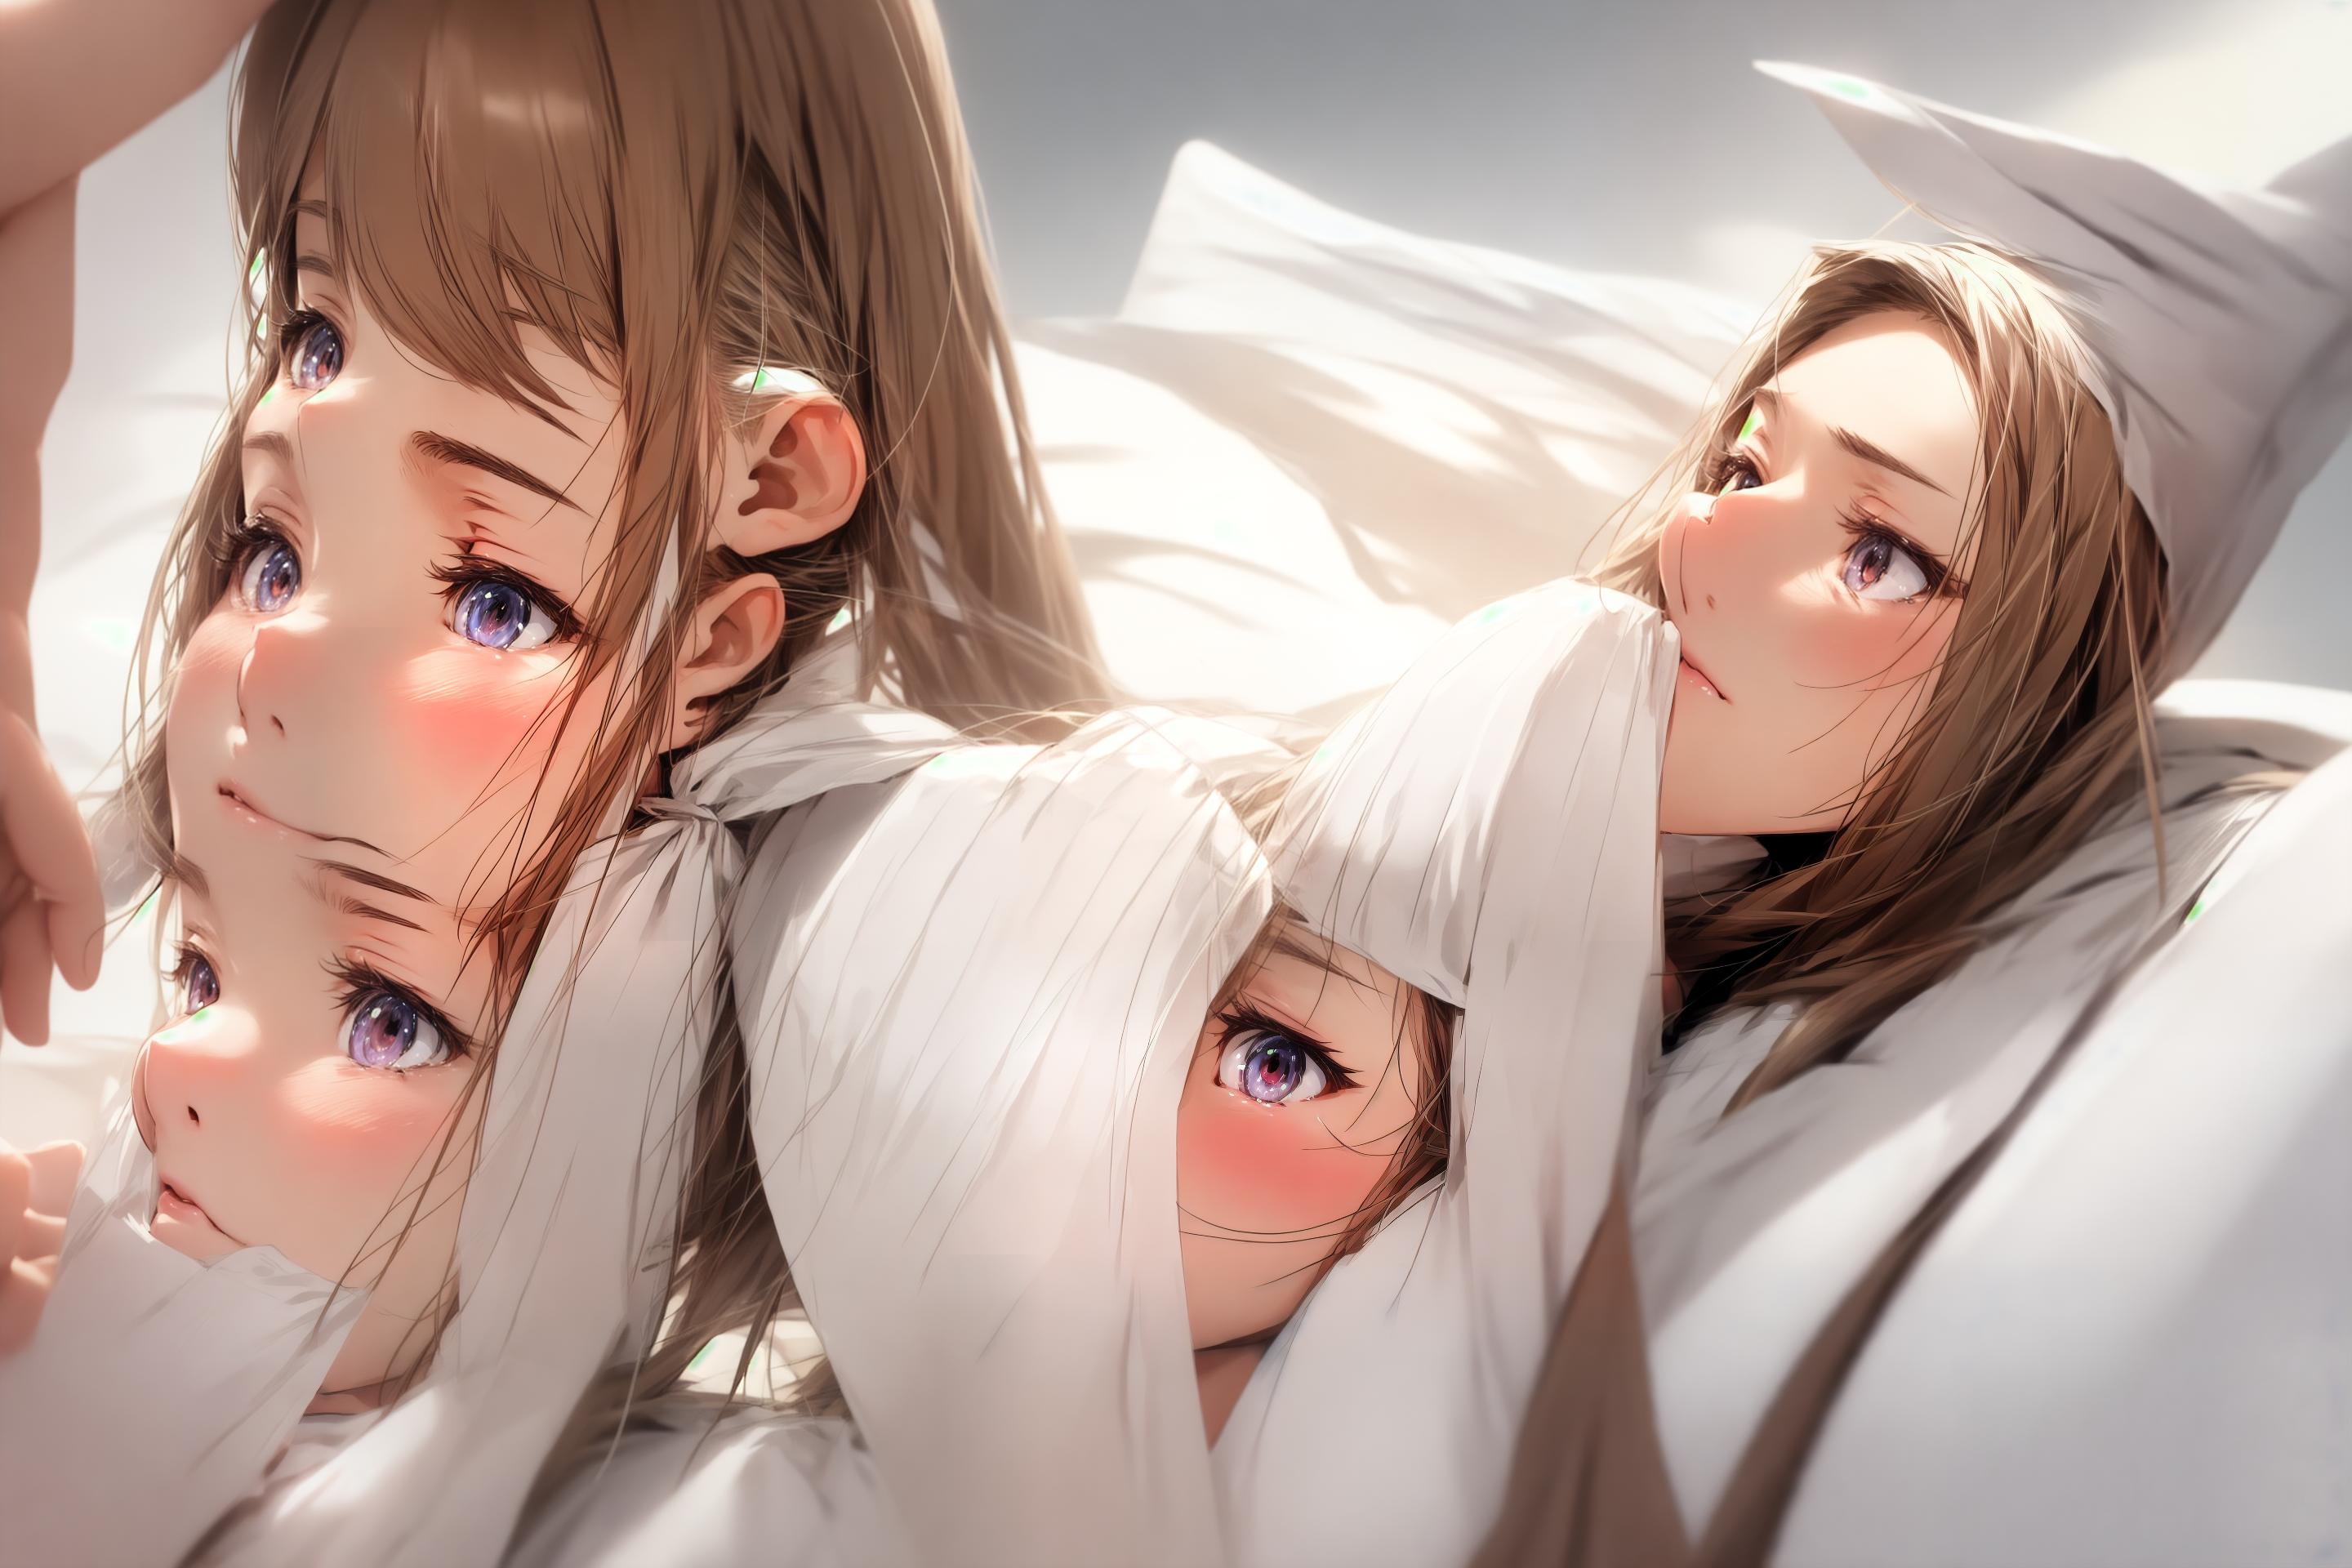  (best quality:0.8), (best quality:0.8), perfect anime illustration,delicate face